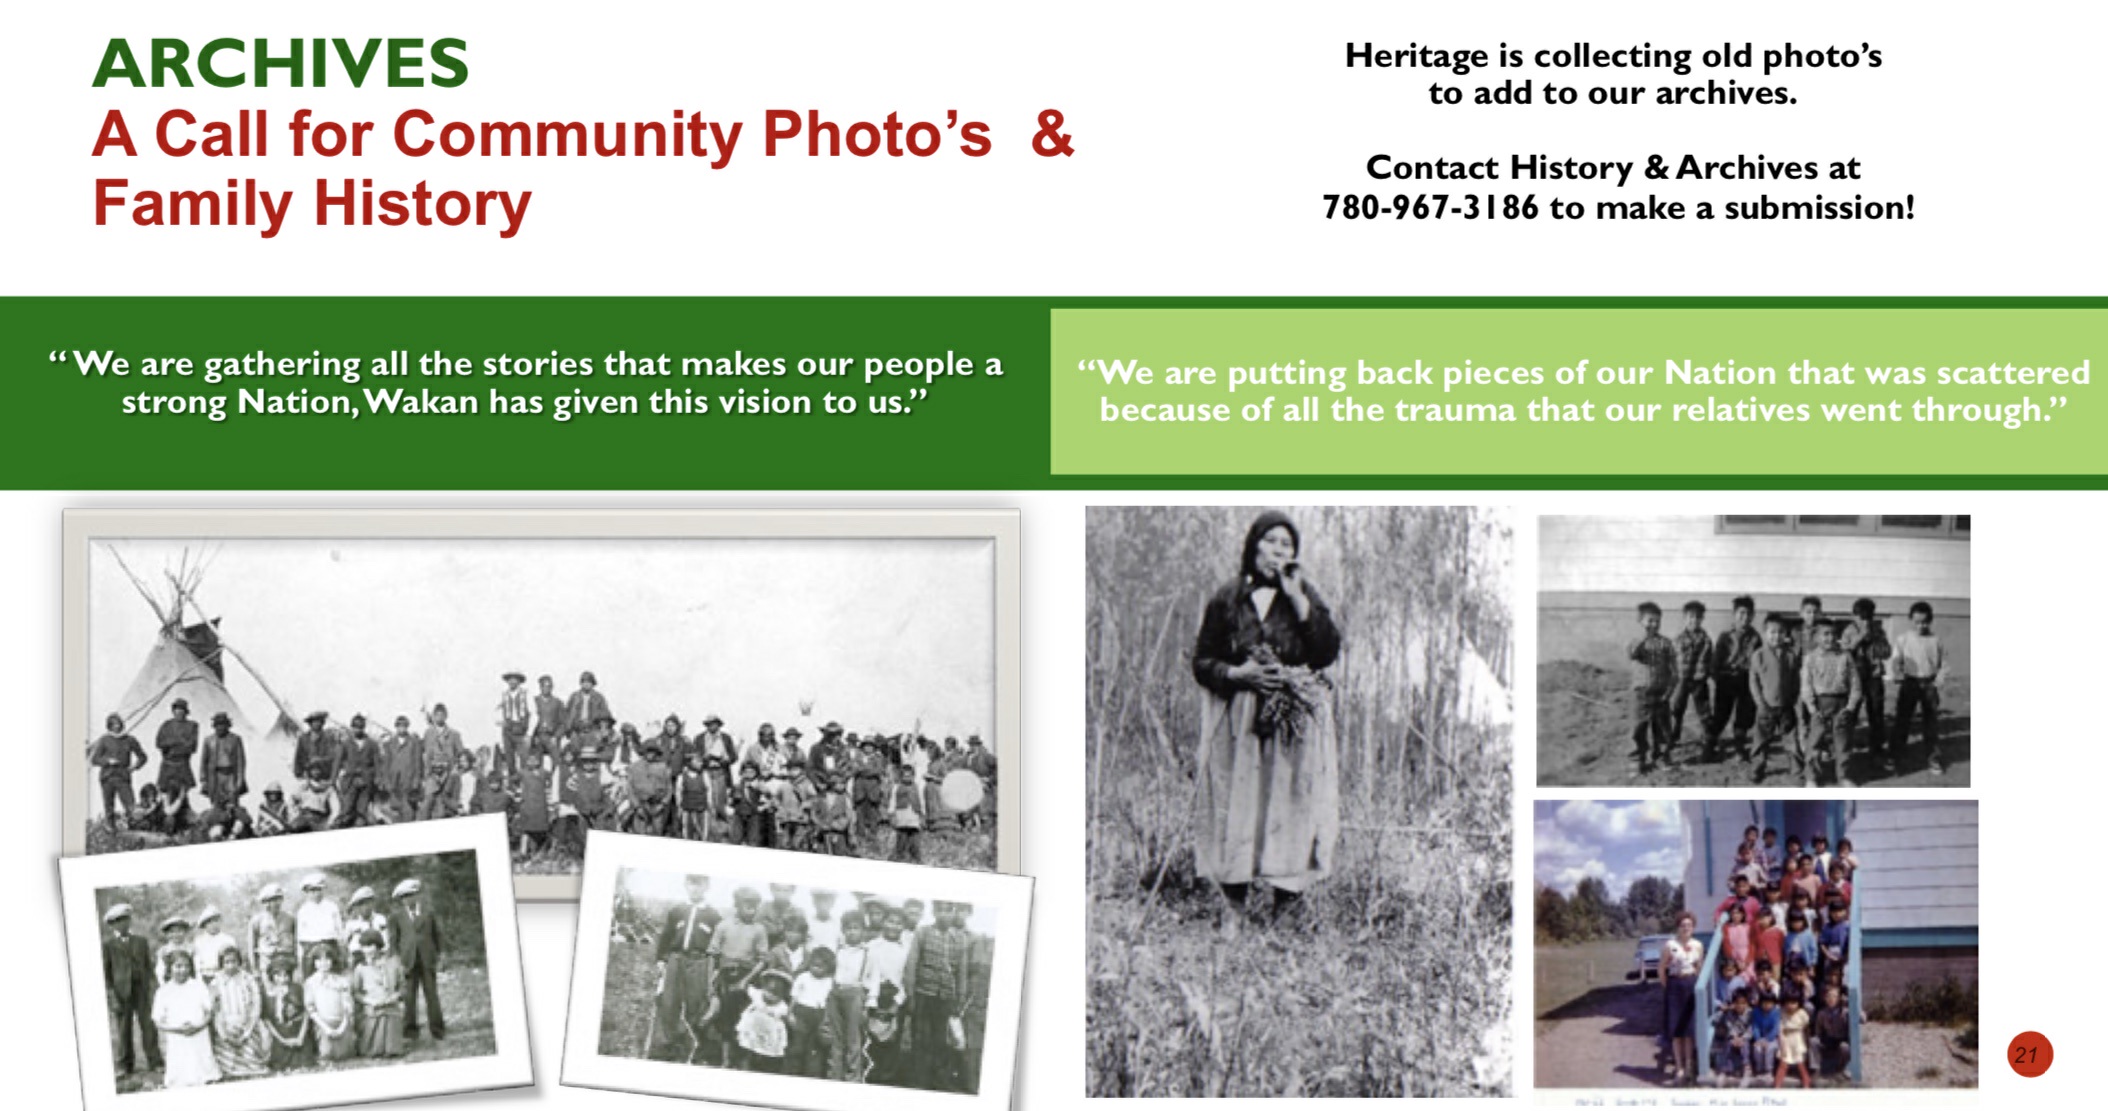 Archives: Call for Community Photos & History